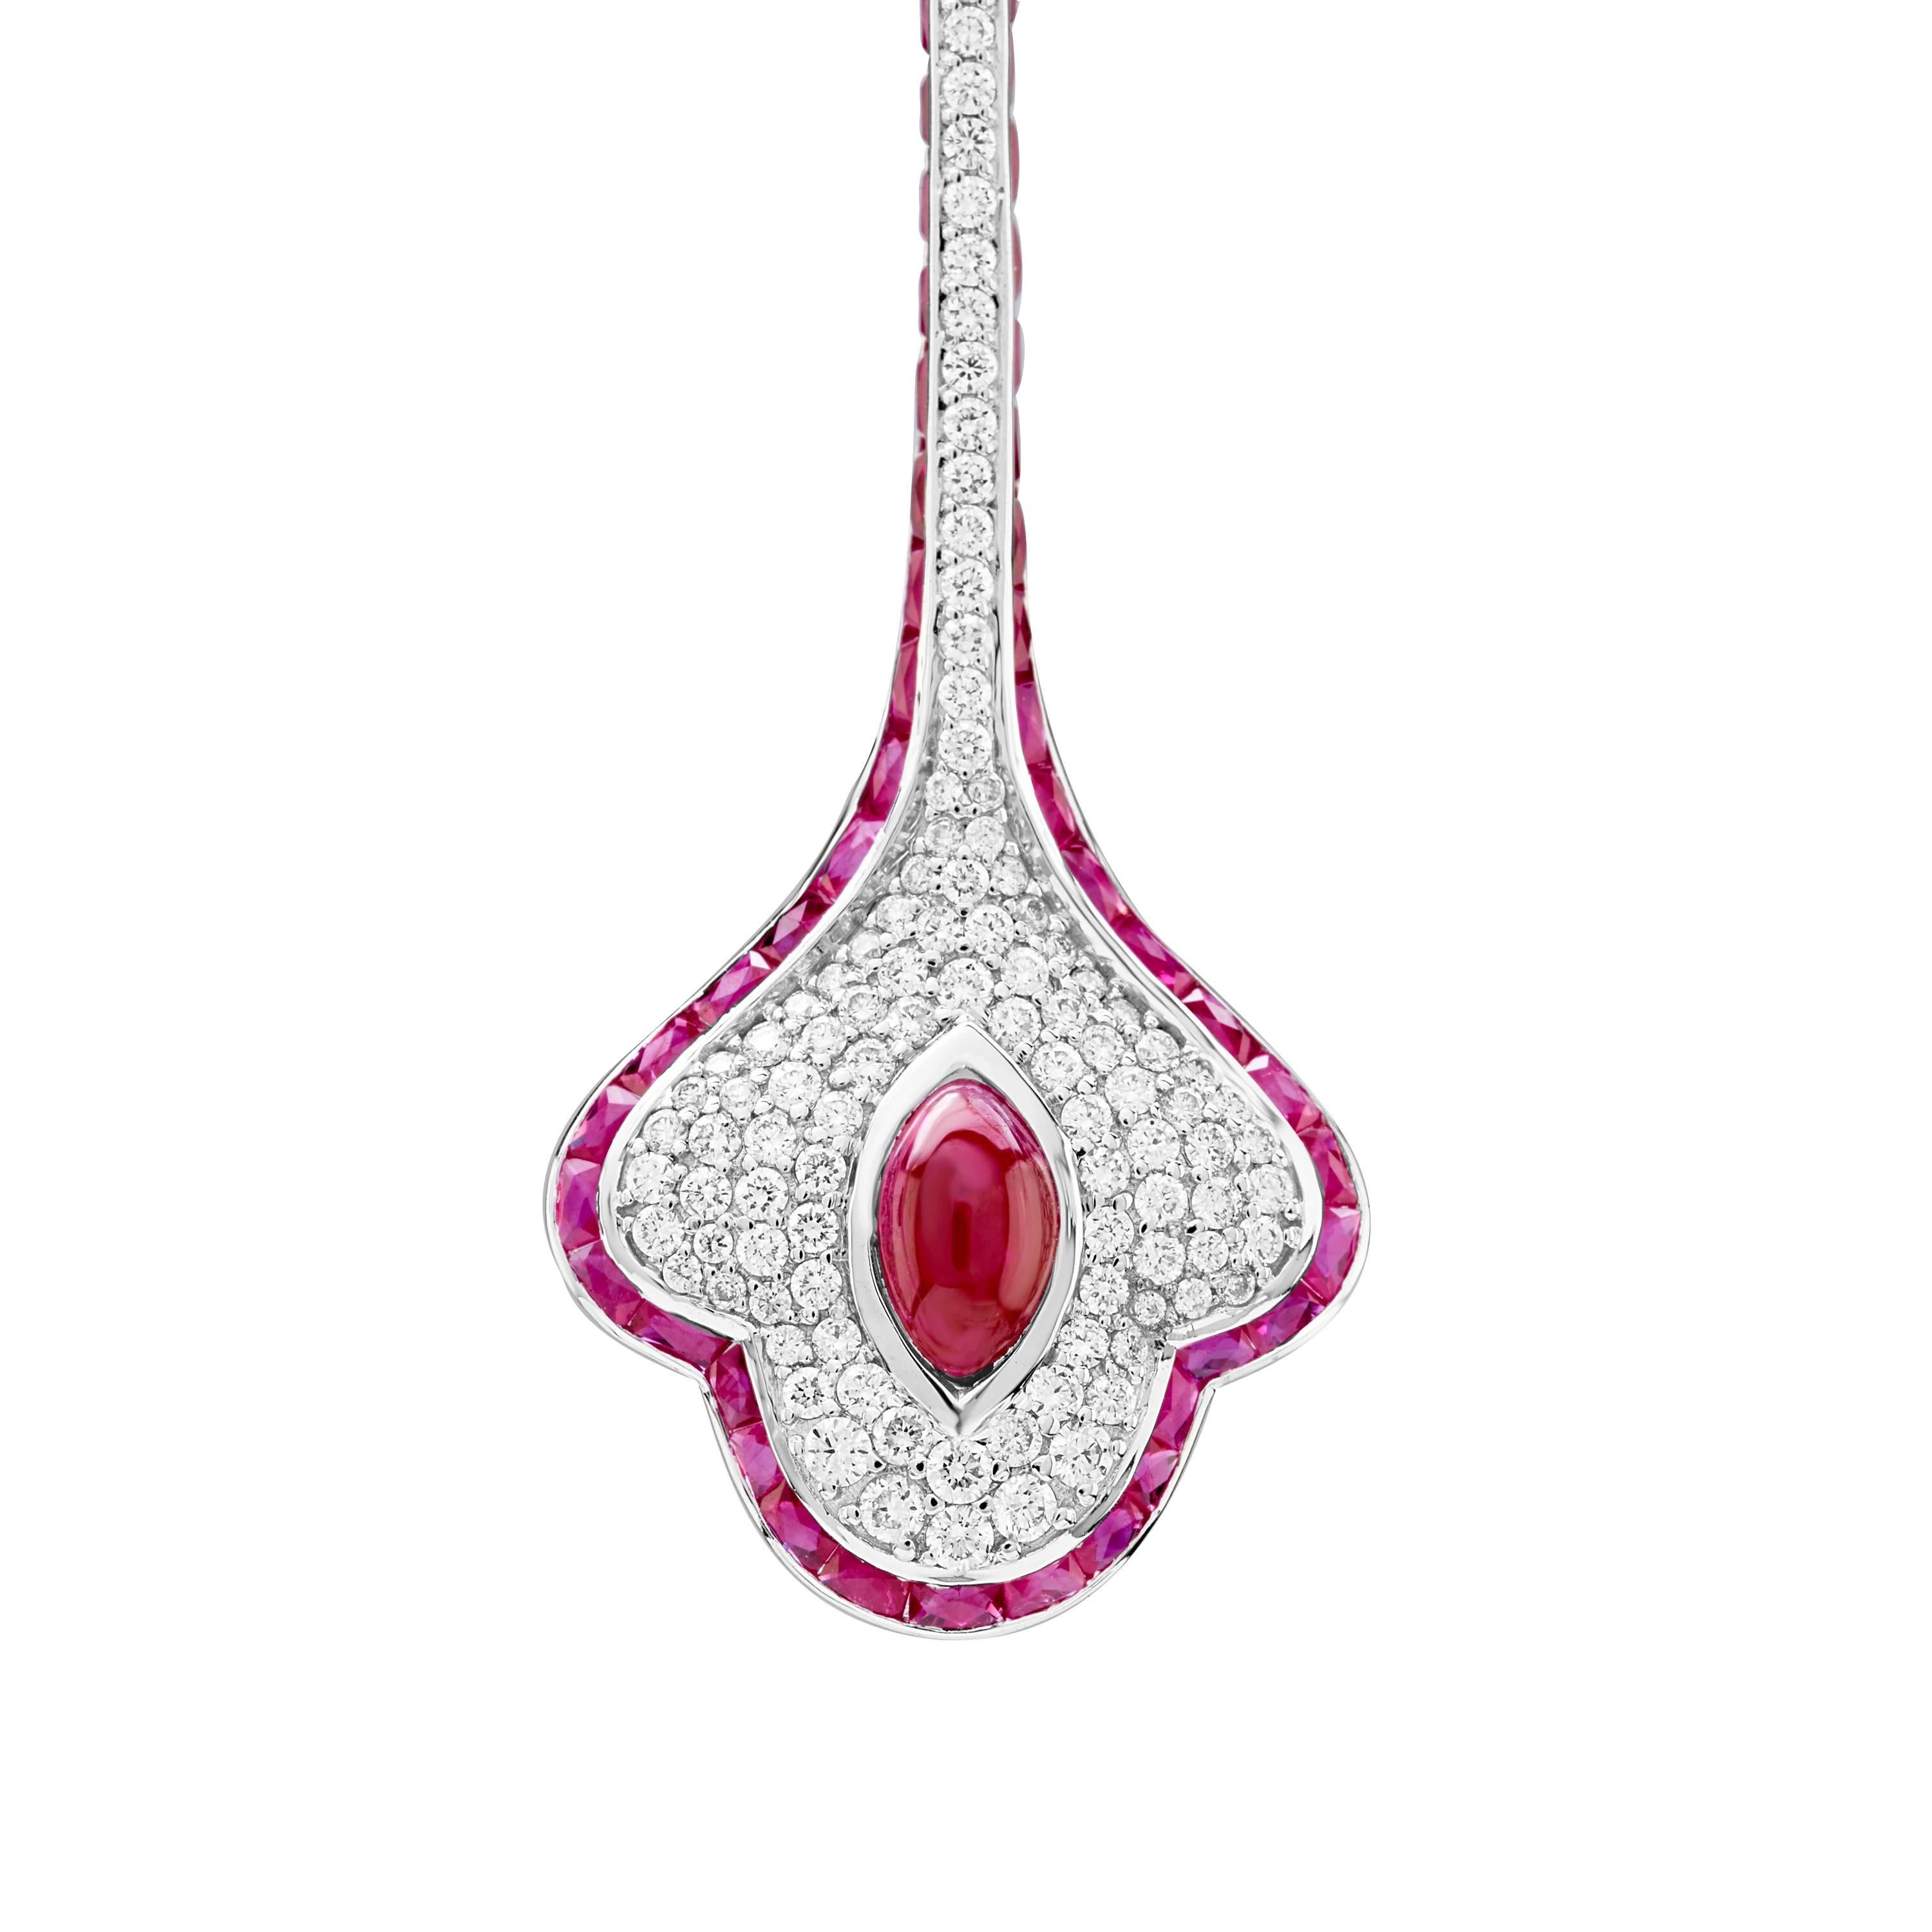 Want to stand out? Then these are the perfect earrings for you!
These earrings are 3D hand crafted with White Gold and Rose Gold bezel Set Marquise Cabochon and Oval Cabochon Natural Ruby perfect for a memorable occasion.
Ruby weighs 9.17 Carats.